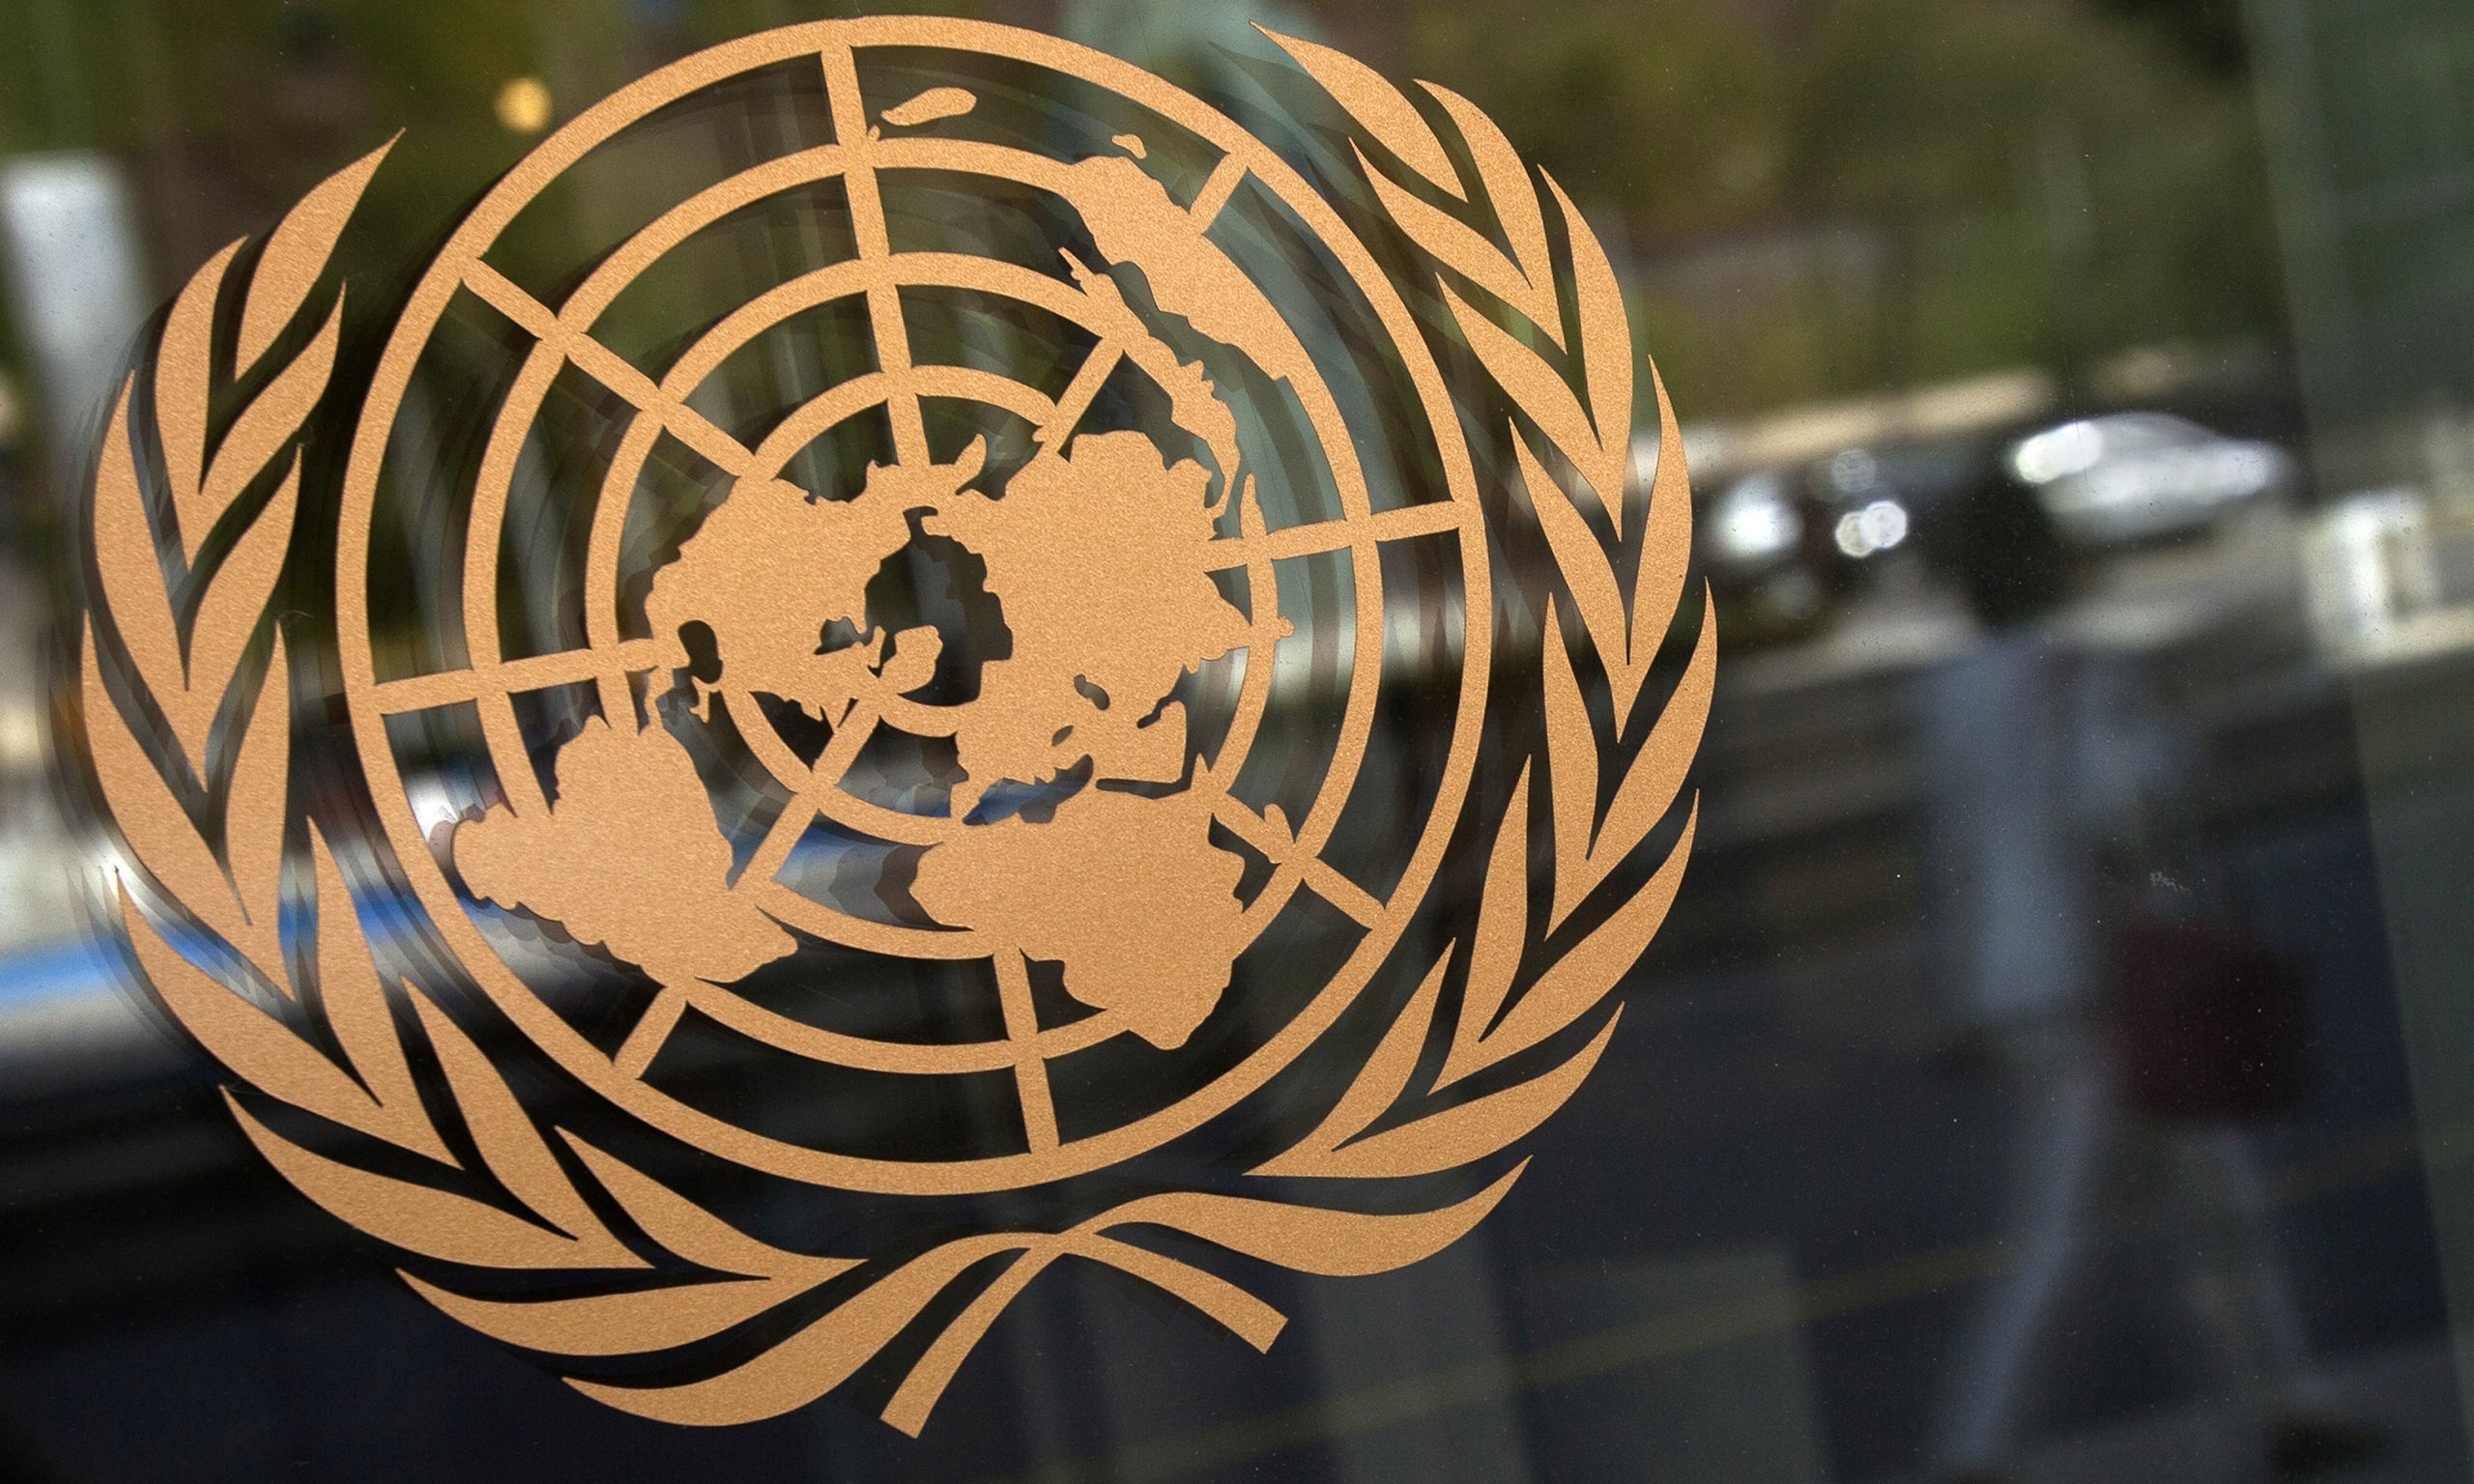 United Nations too Christian, claims report | World news | The Guardian